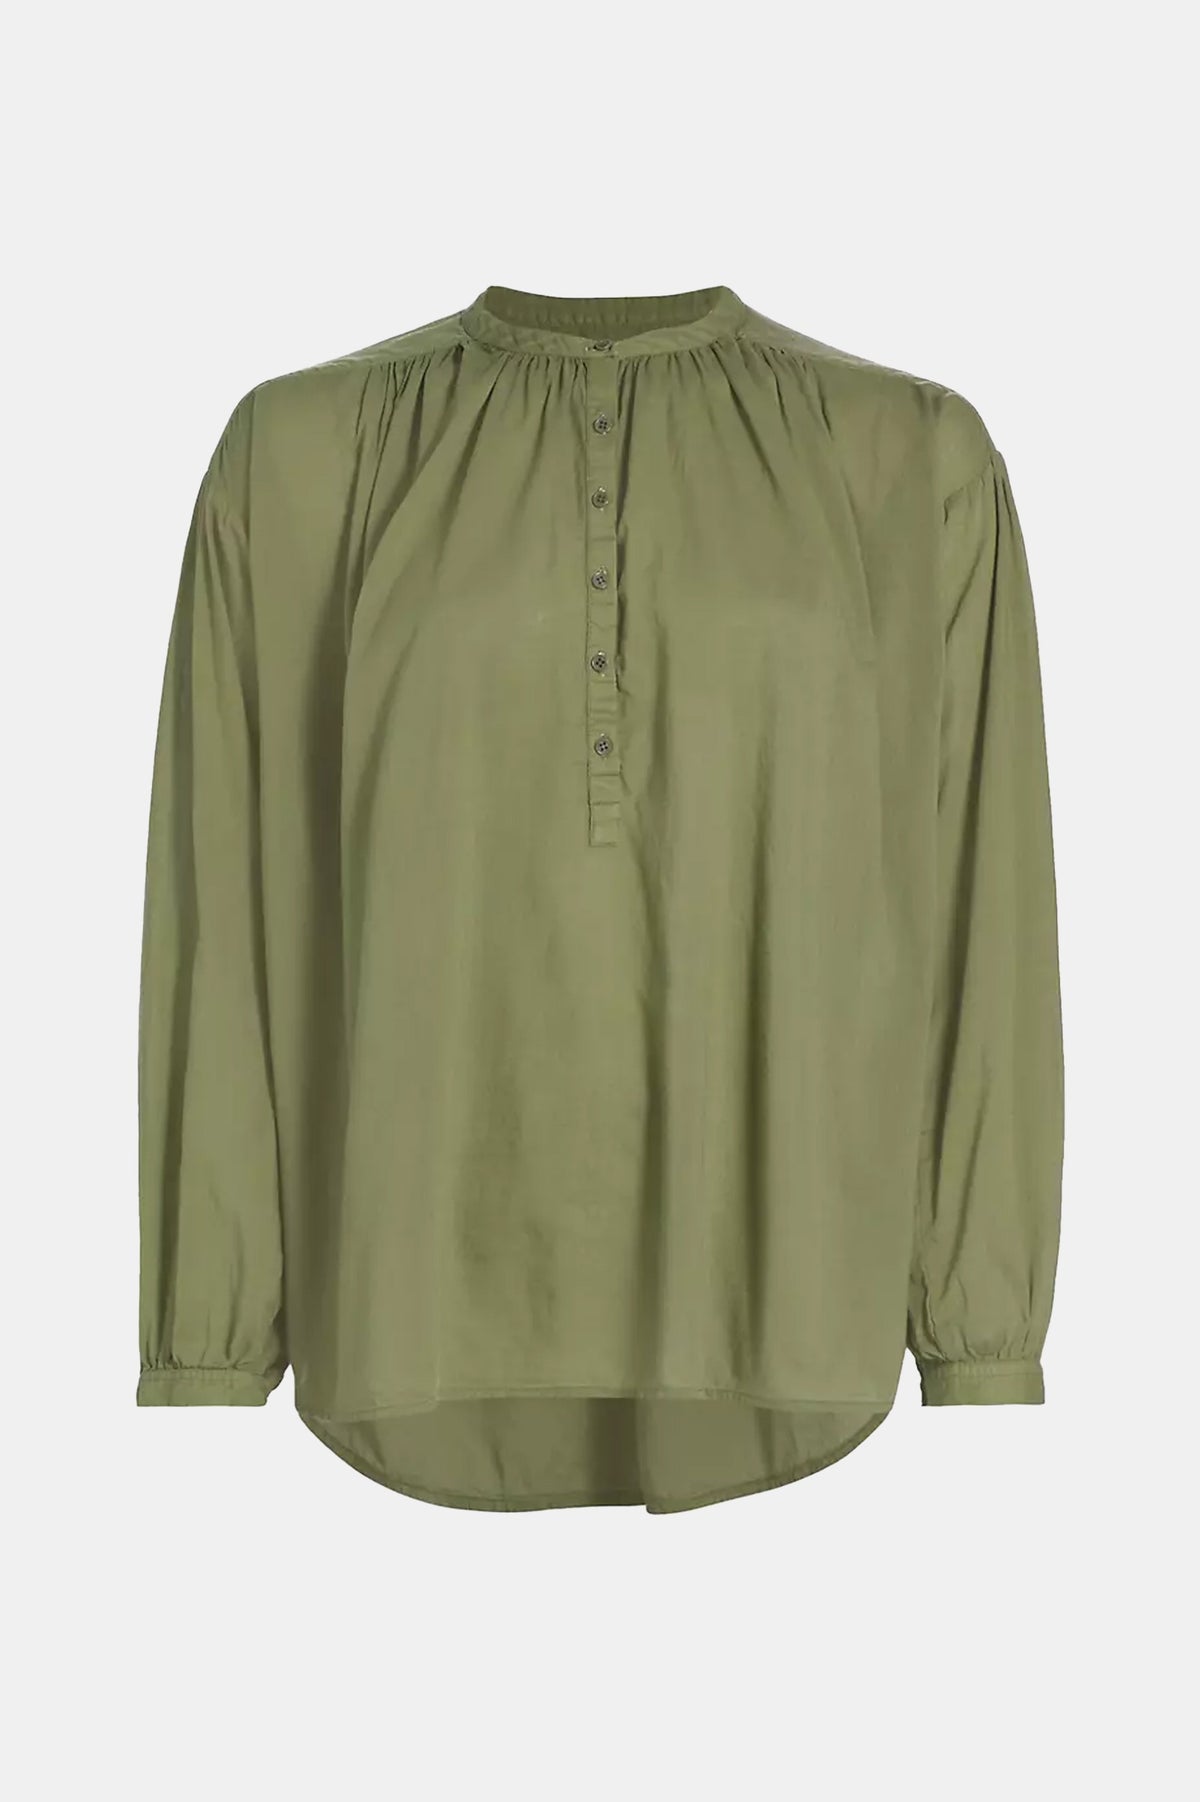 Neville Blouse in Camo